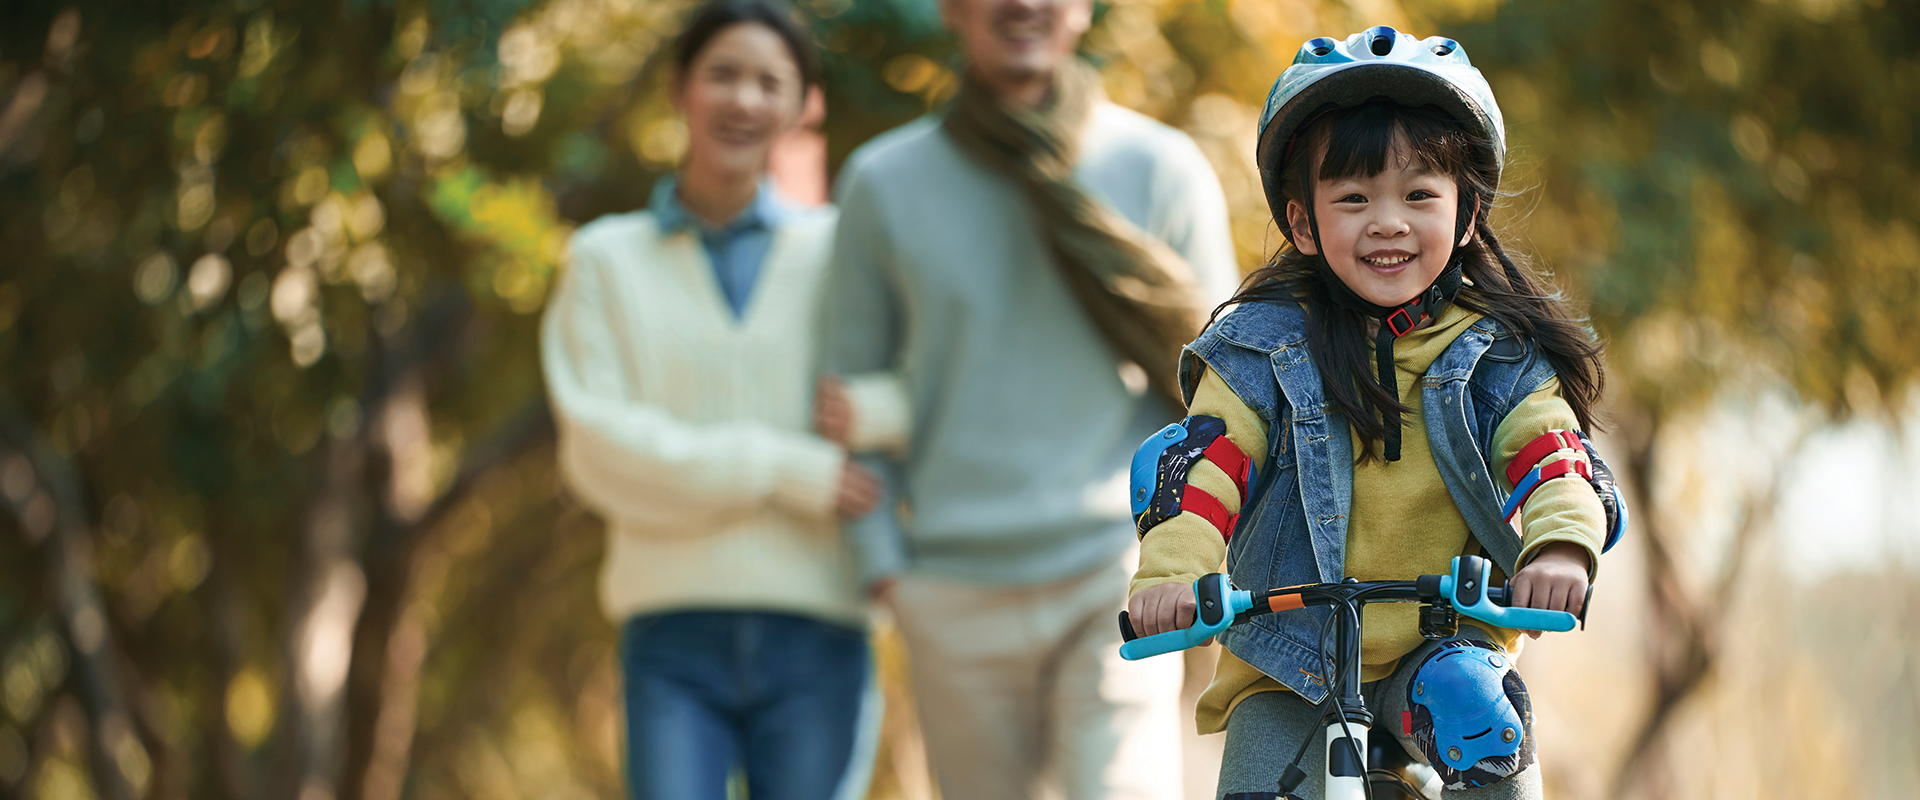 A girl riding bike with her family walking in the background